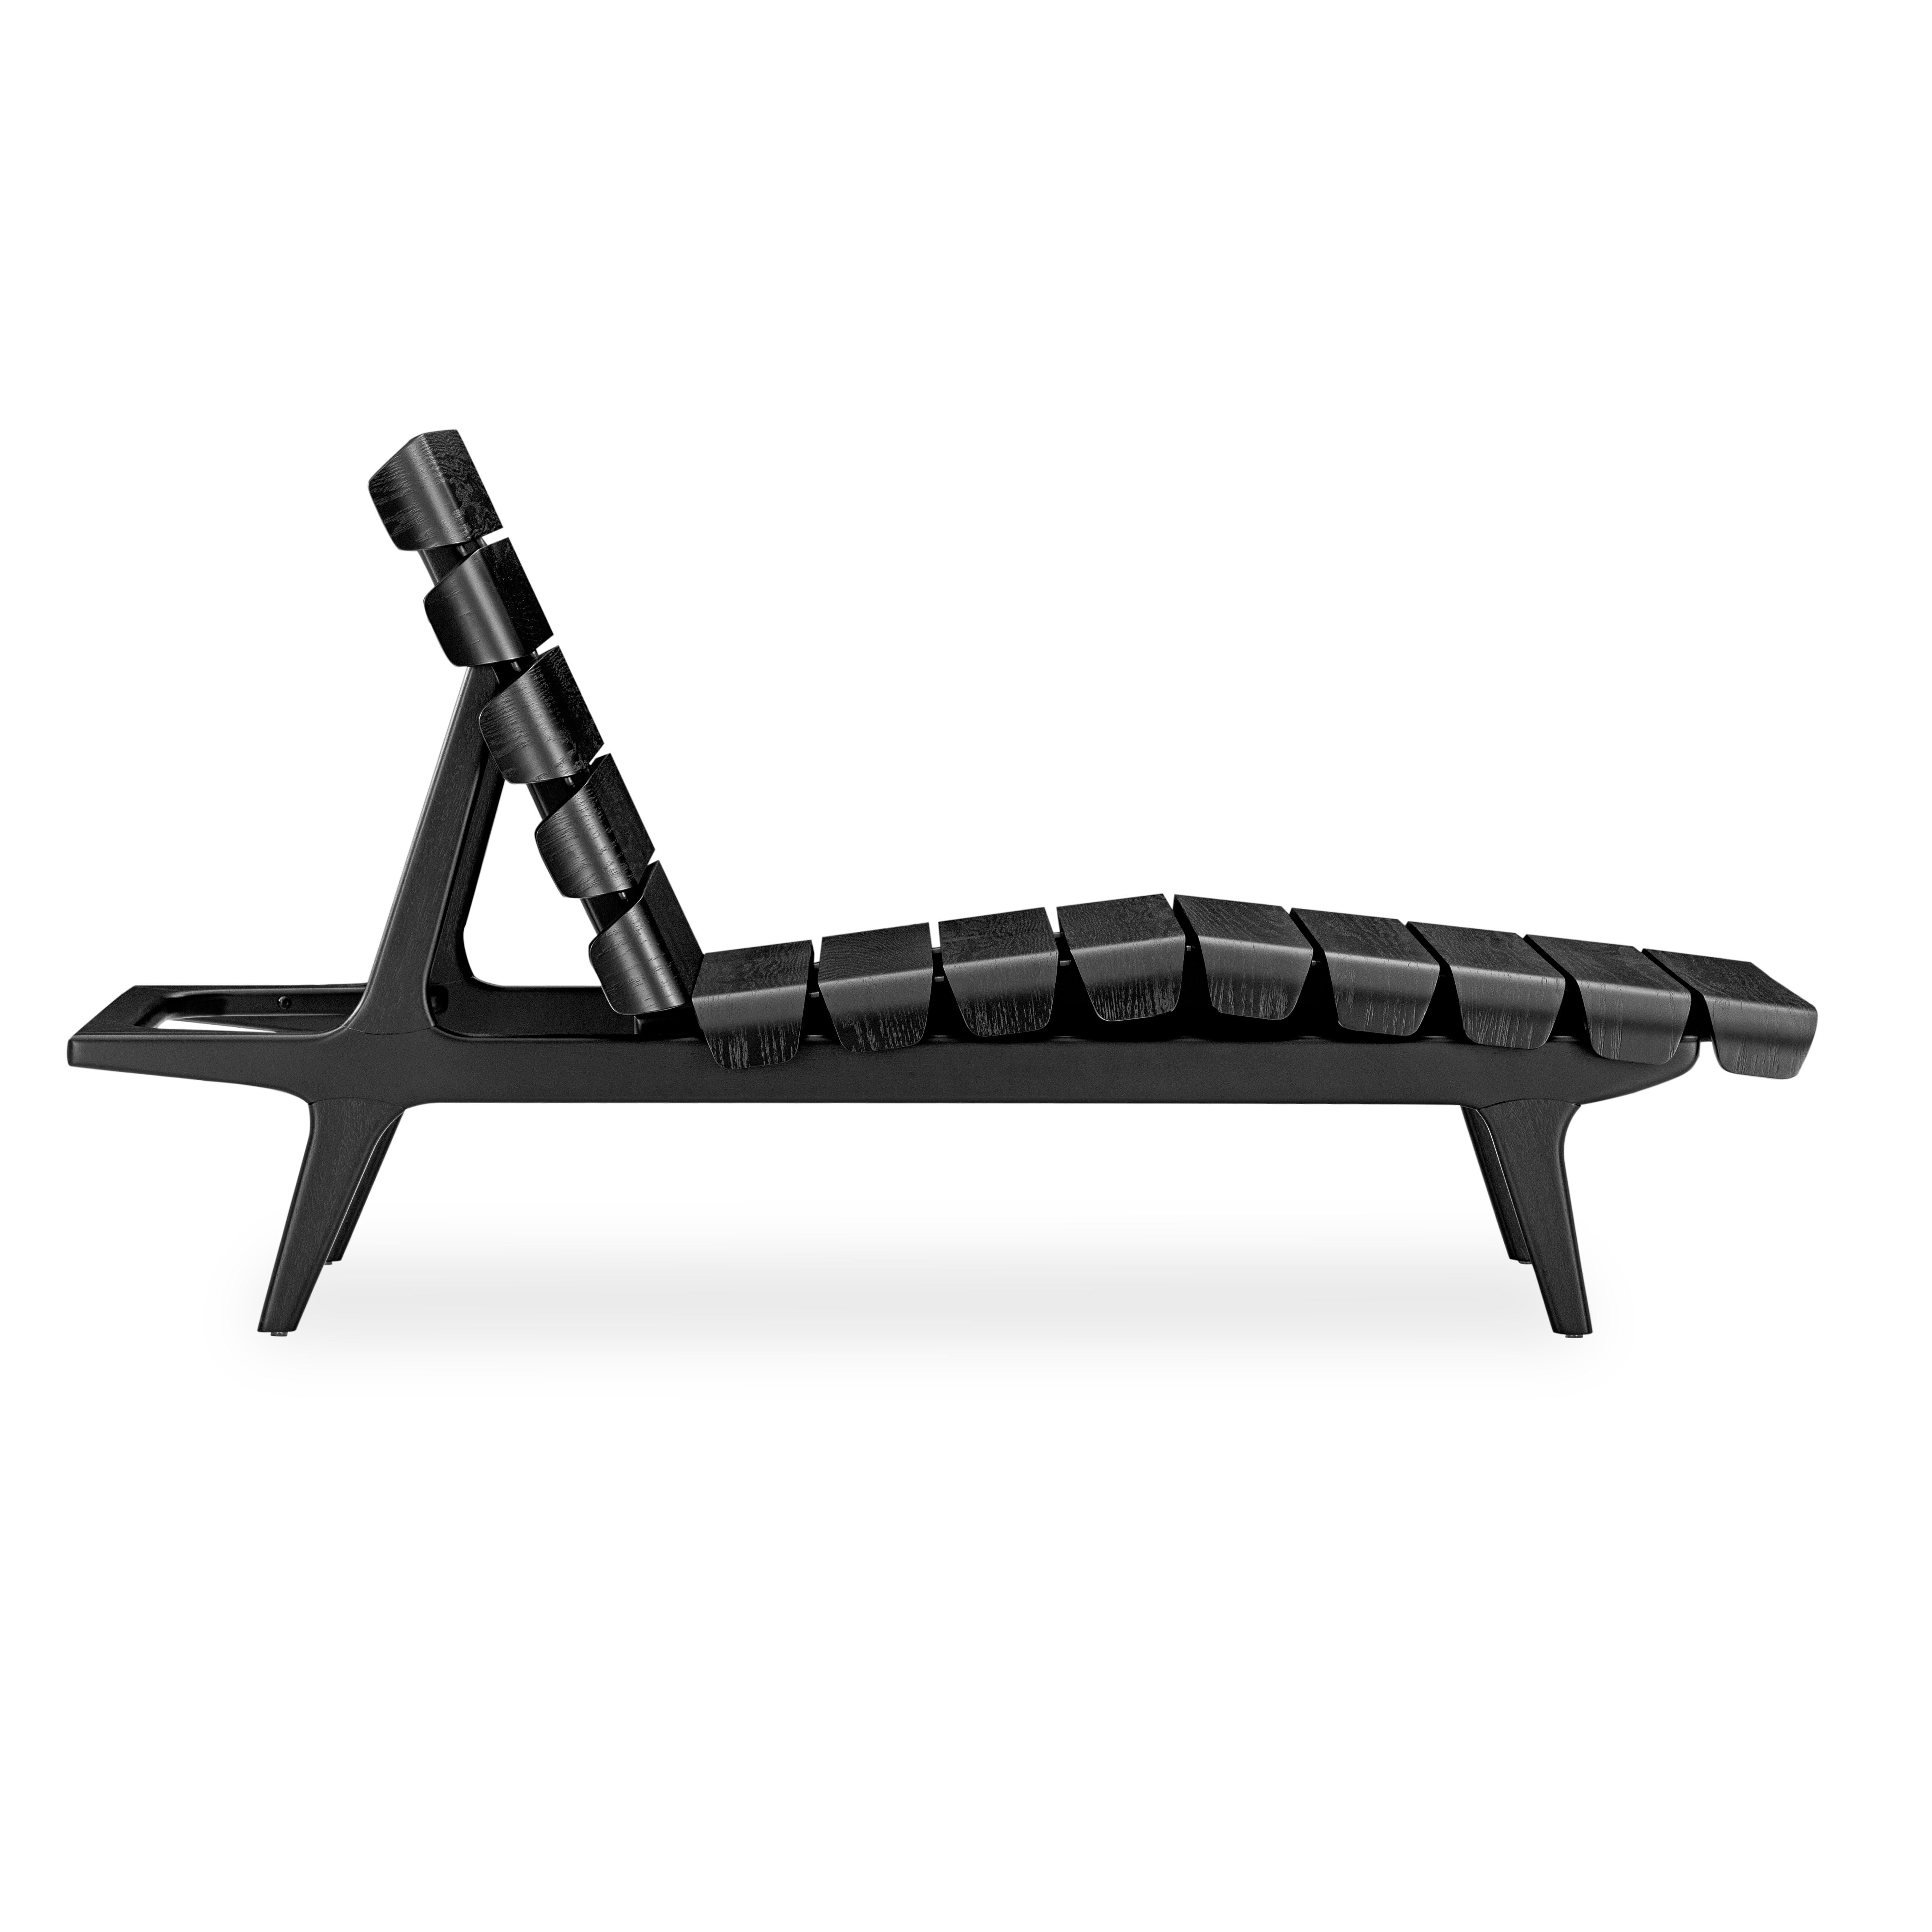 The Clave indoor chaise lounge in a monochromatic black wood Uultis finish, all made from wood, is the perfect addition for any contemporary, minimalist, or traditional design project. This chaise is the ideal chair to relax and lounge with its